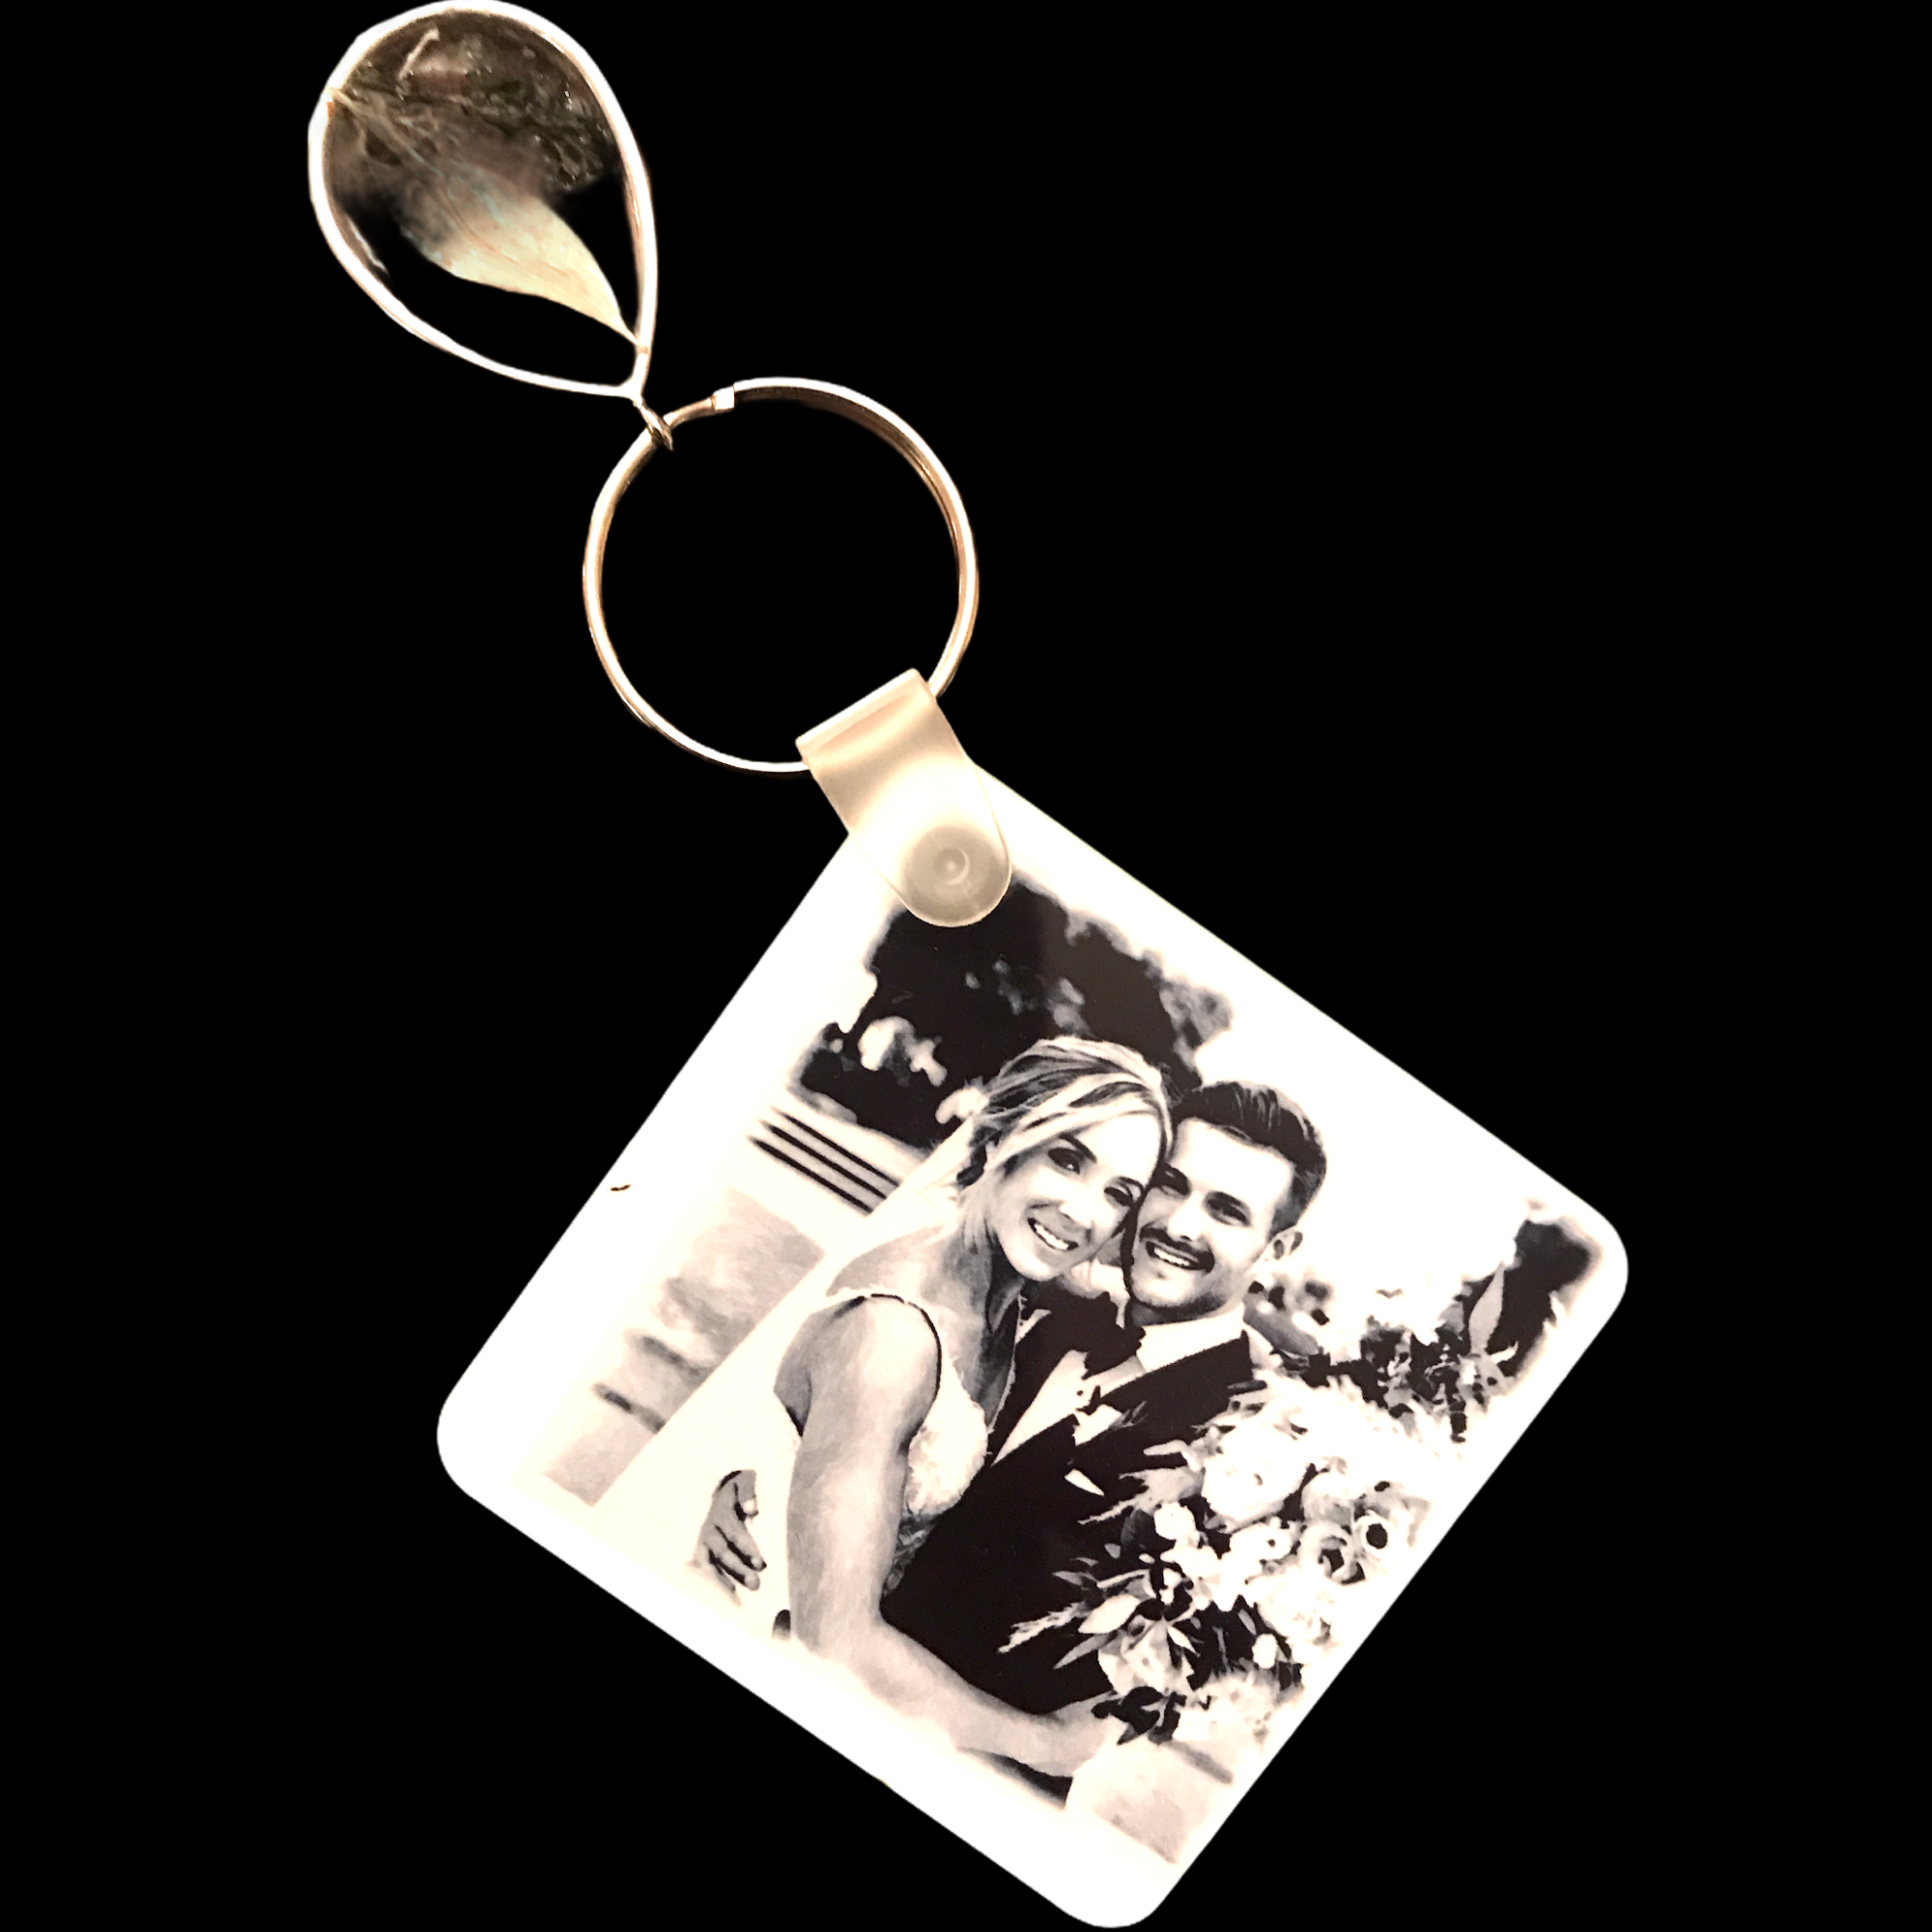 Keychain picture and Bouquet flower charm